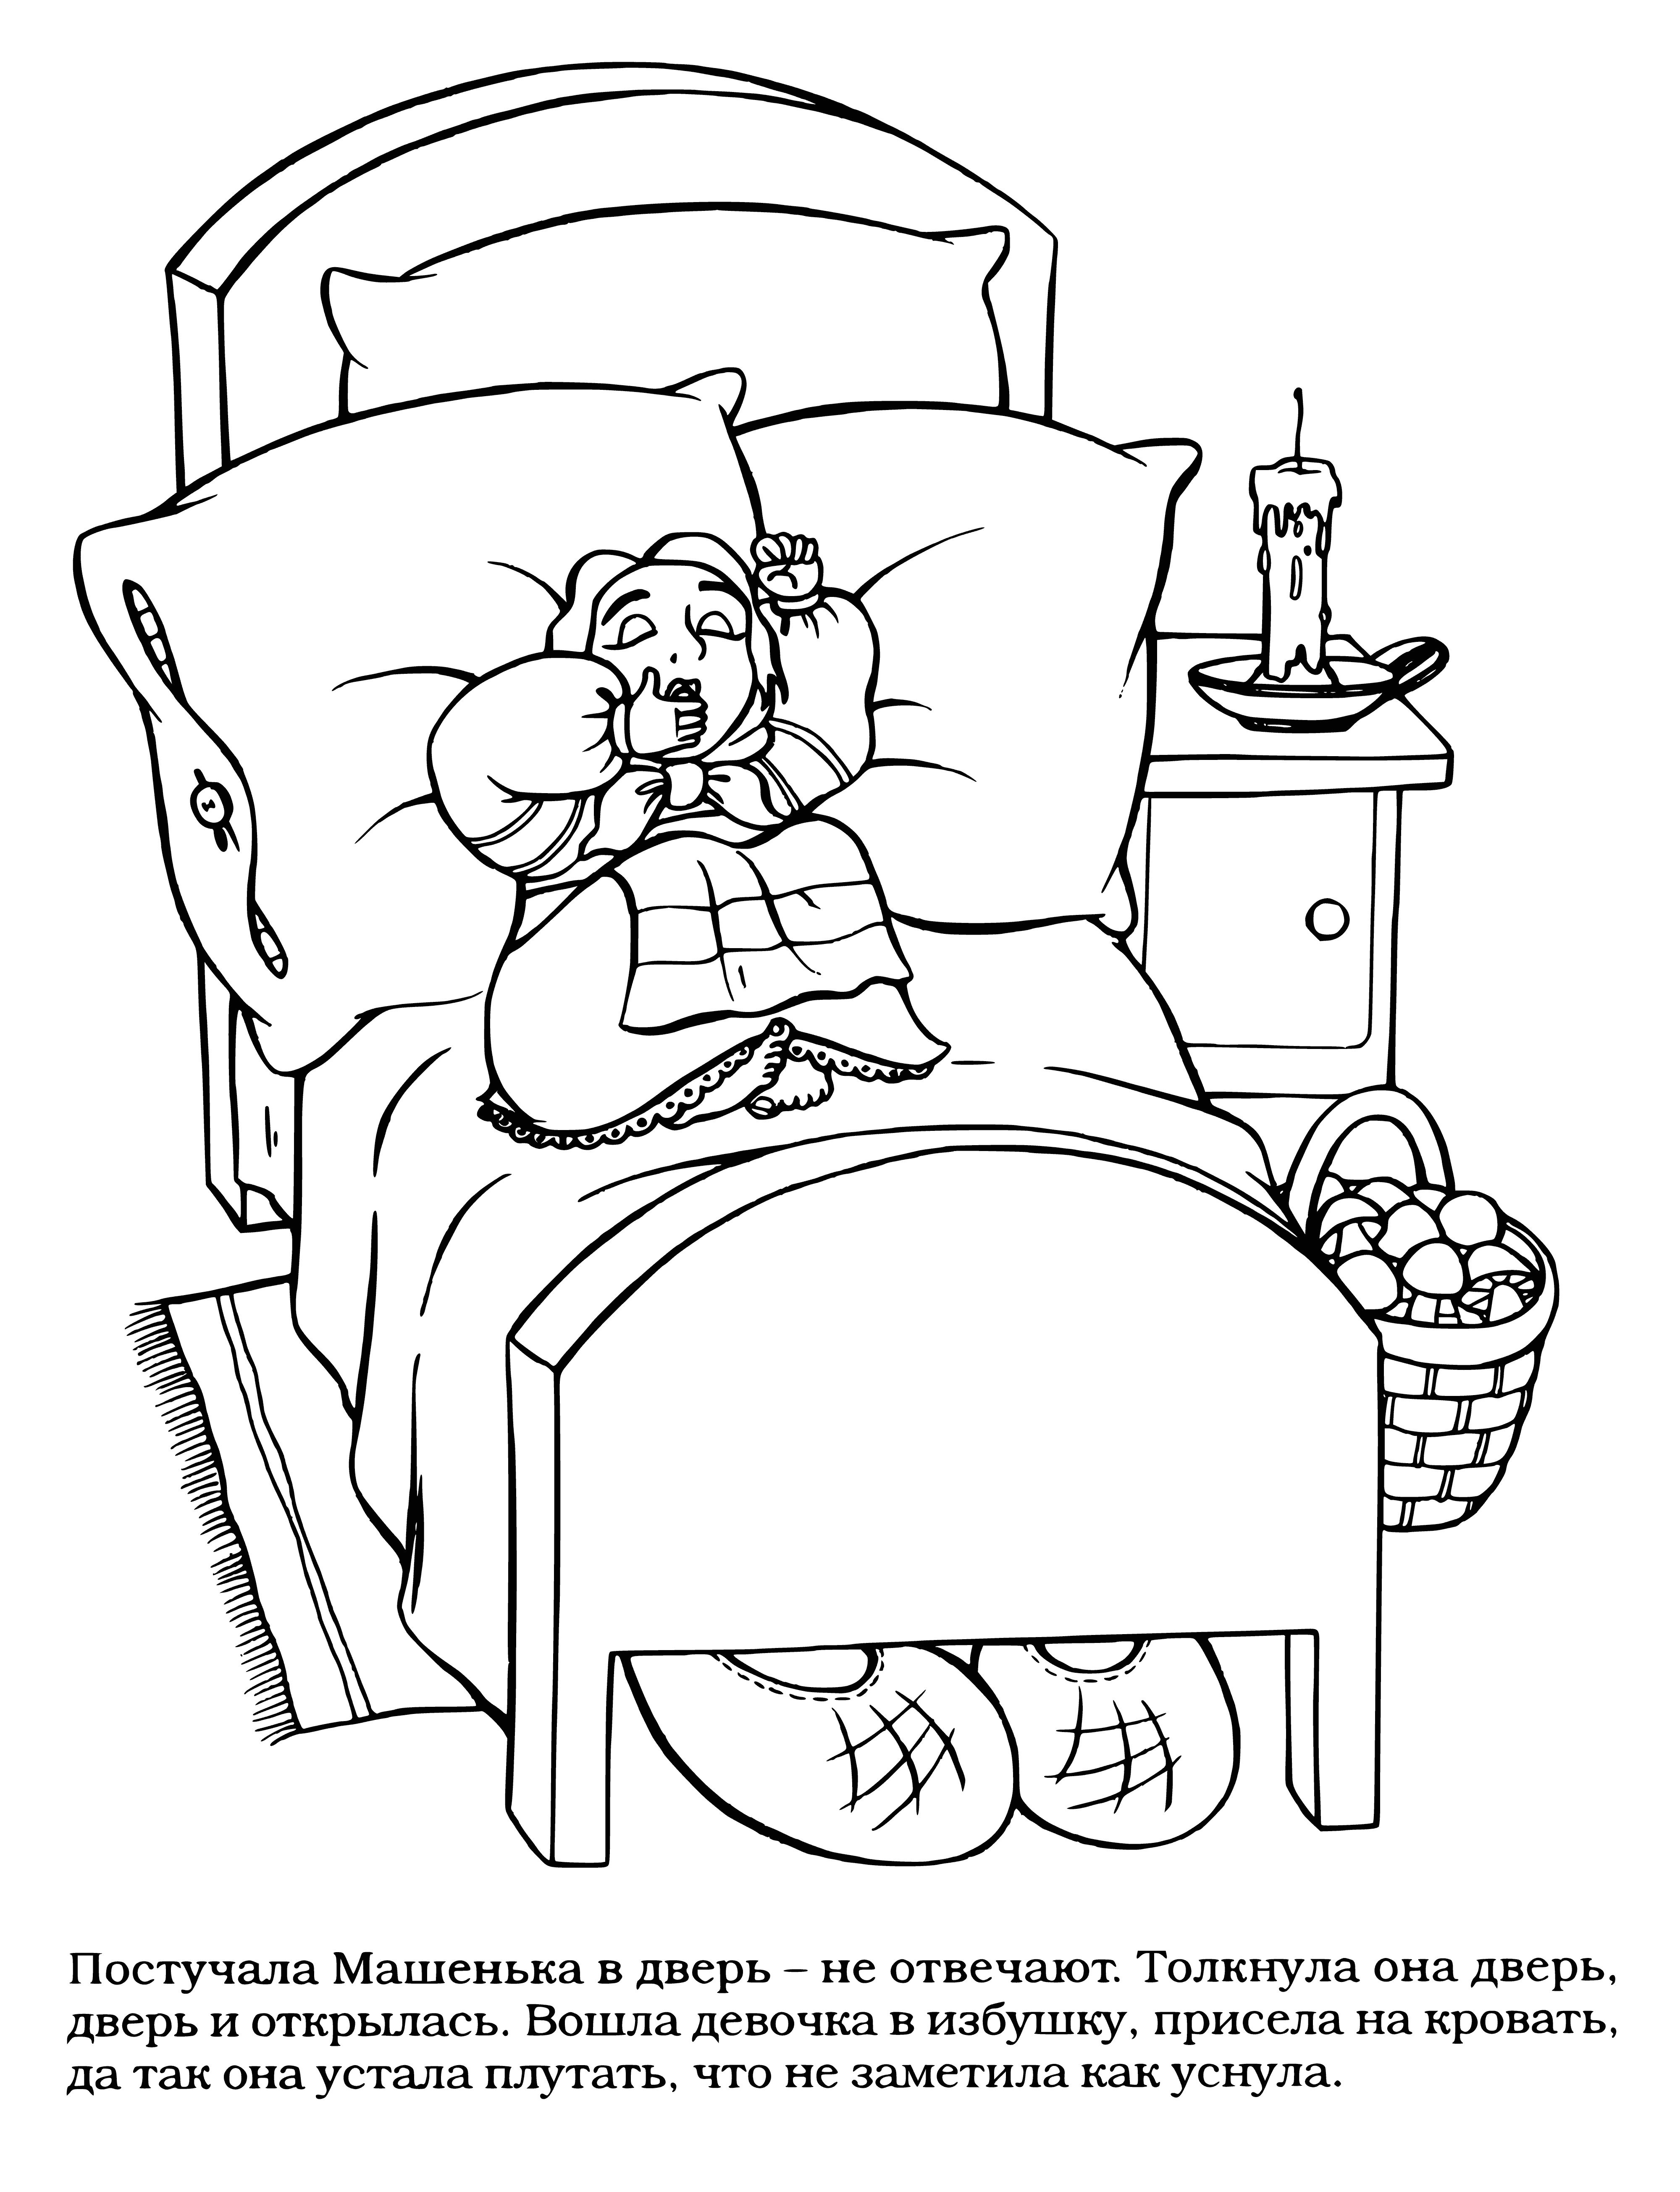 Masha sat down on the bed coloring page